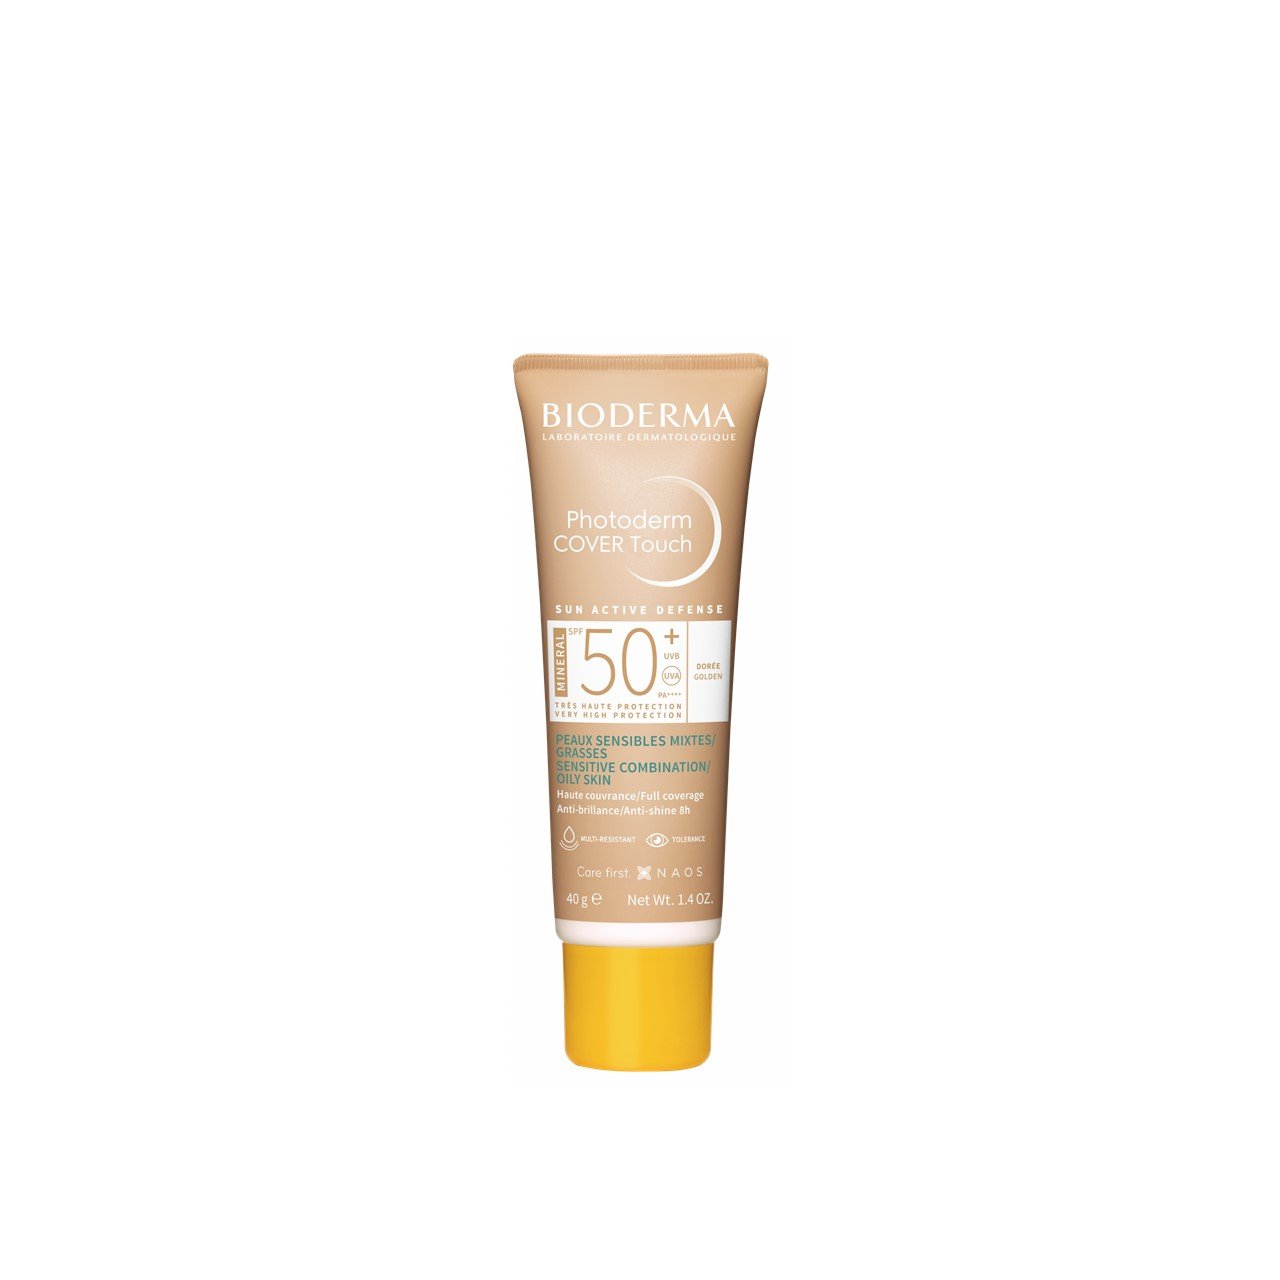 Bioderma Photoderm Cover Touch Mineral SPF50+ Golden 40g (1.41oz)